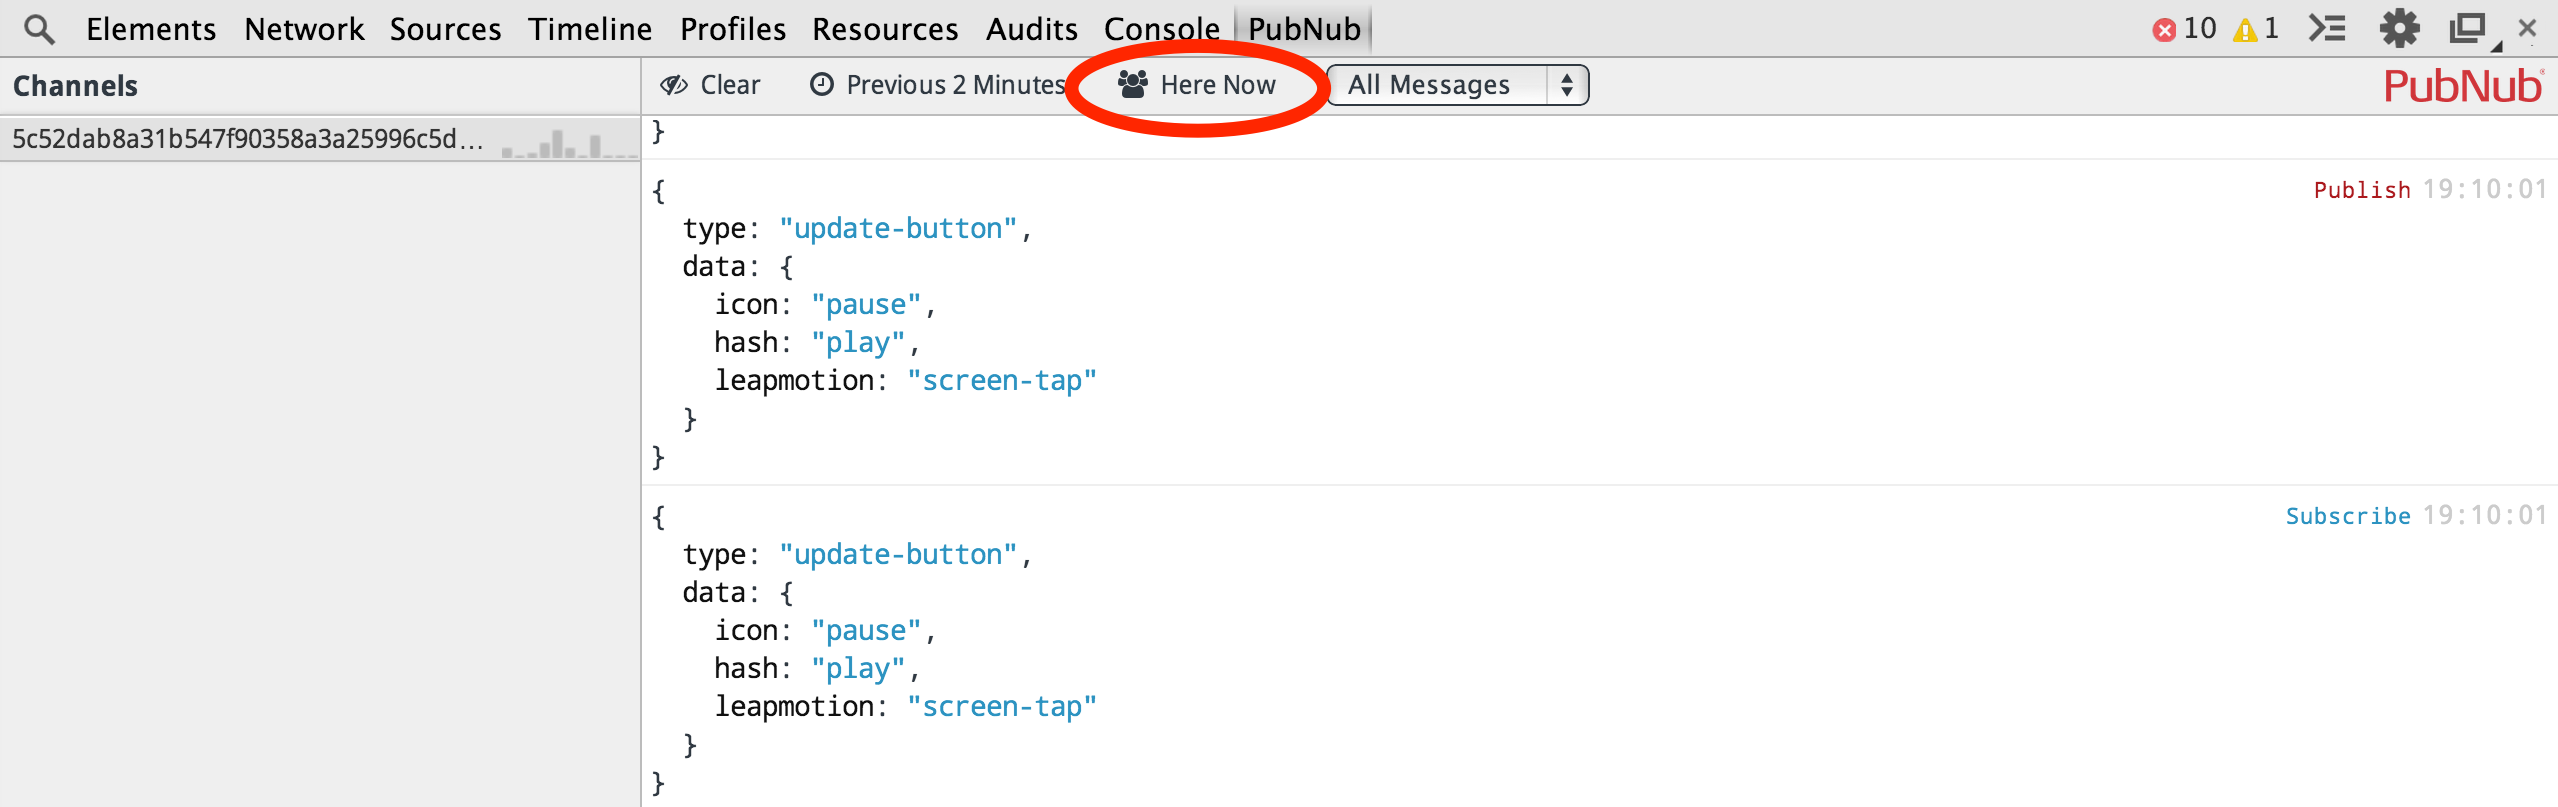 PubNub console includes shortcut to the toolbar